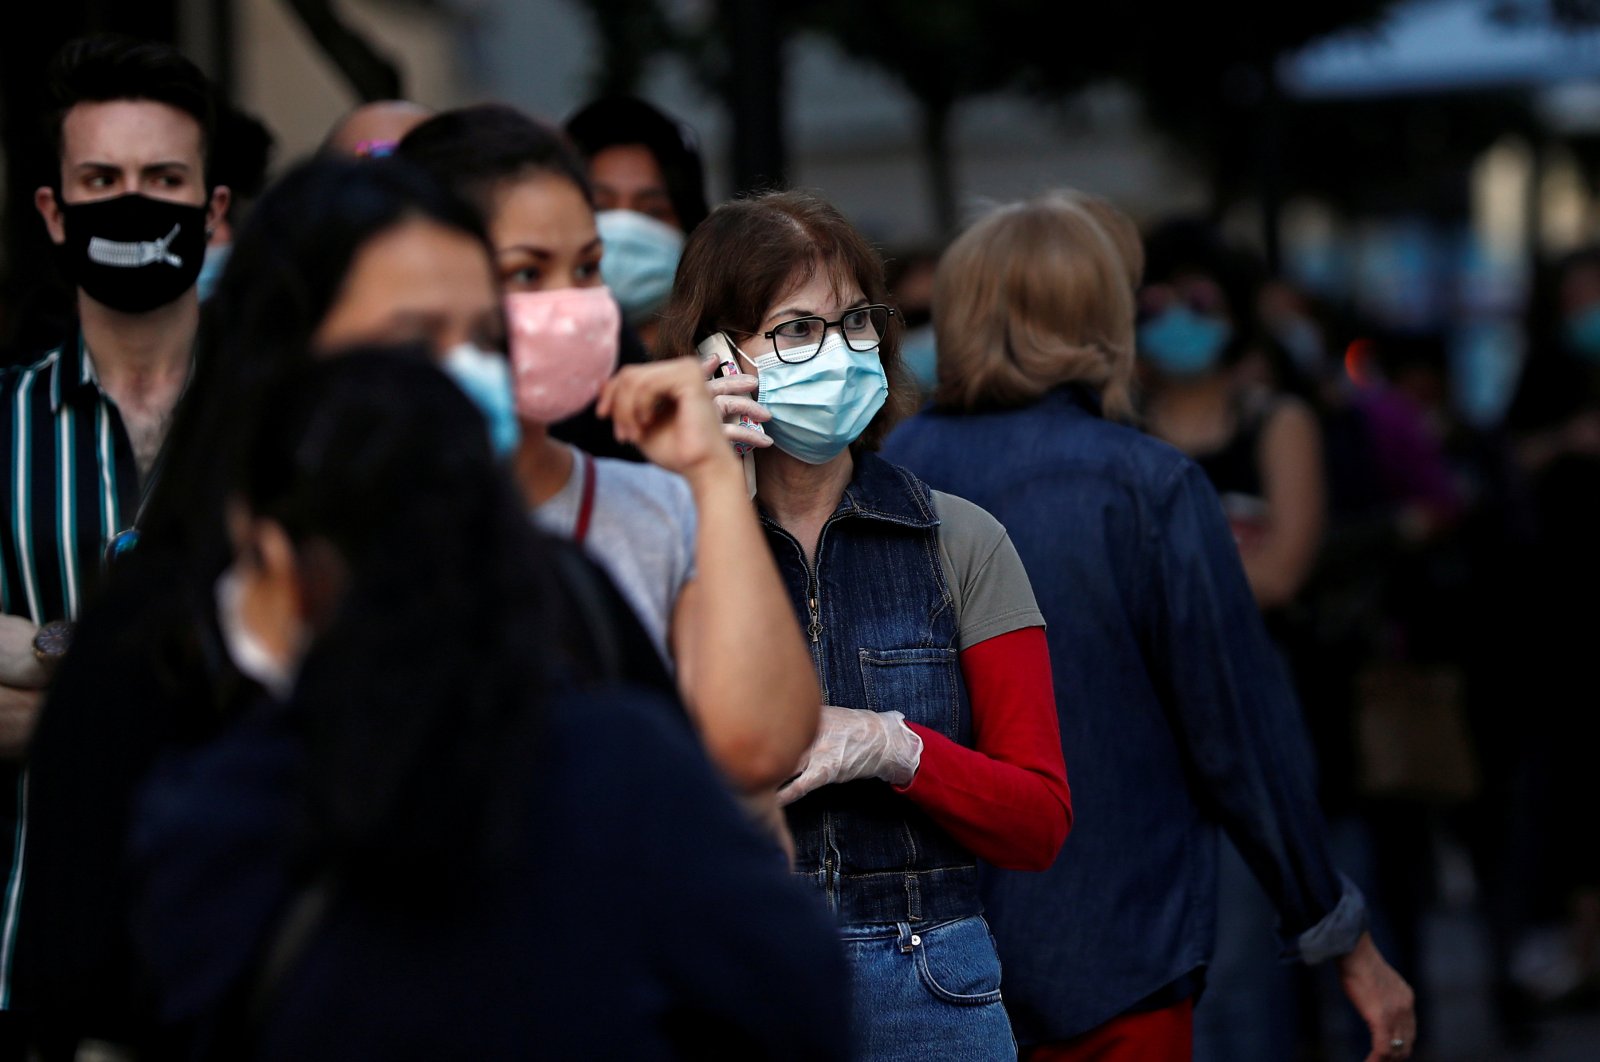 People wearing face masks queue to enter a reopened Primark store as Madrid eases lockdown restrictions following the coronavirus disease (COVID-19) outbreak, in Madrid, Spain, June 11, 2020. (Reuters Photo)